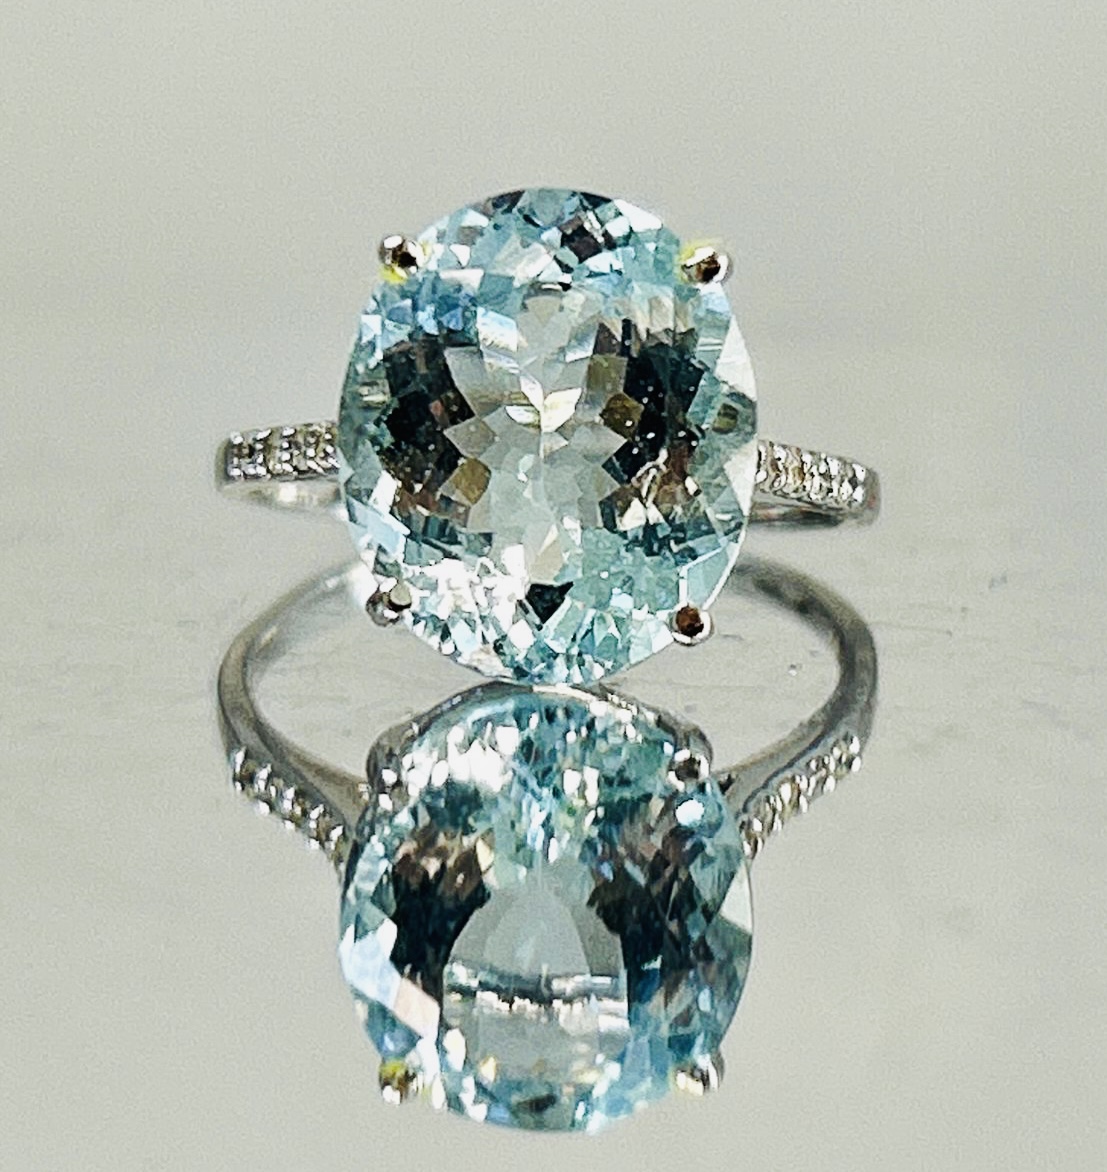 Beautiful Natural Flawless 5.81CT Aquamarine Ring With Diamonds And 18k Gold - Image 6 of 6